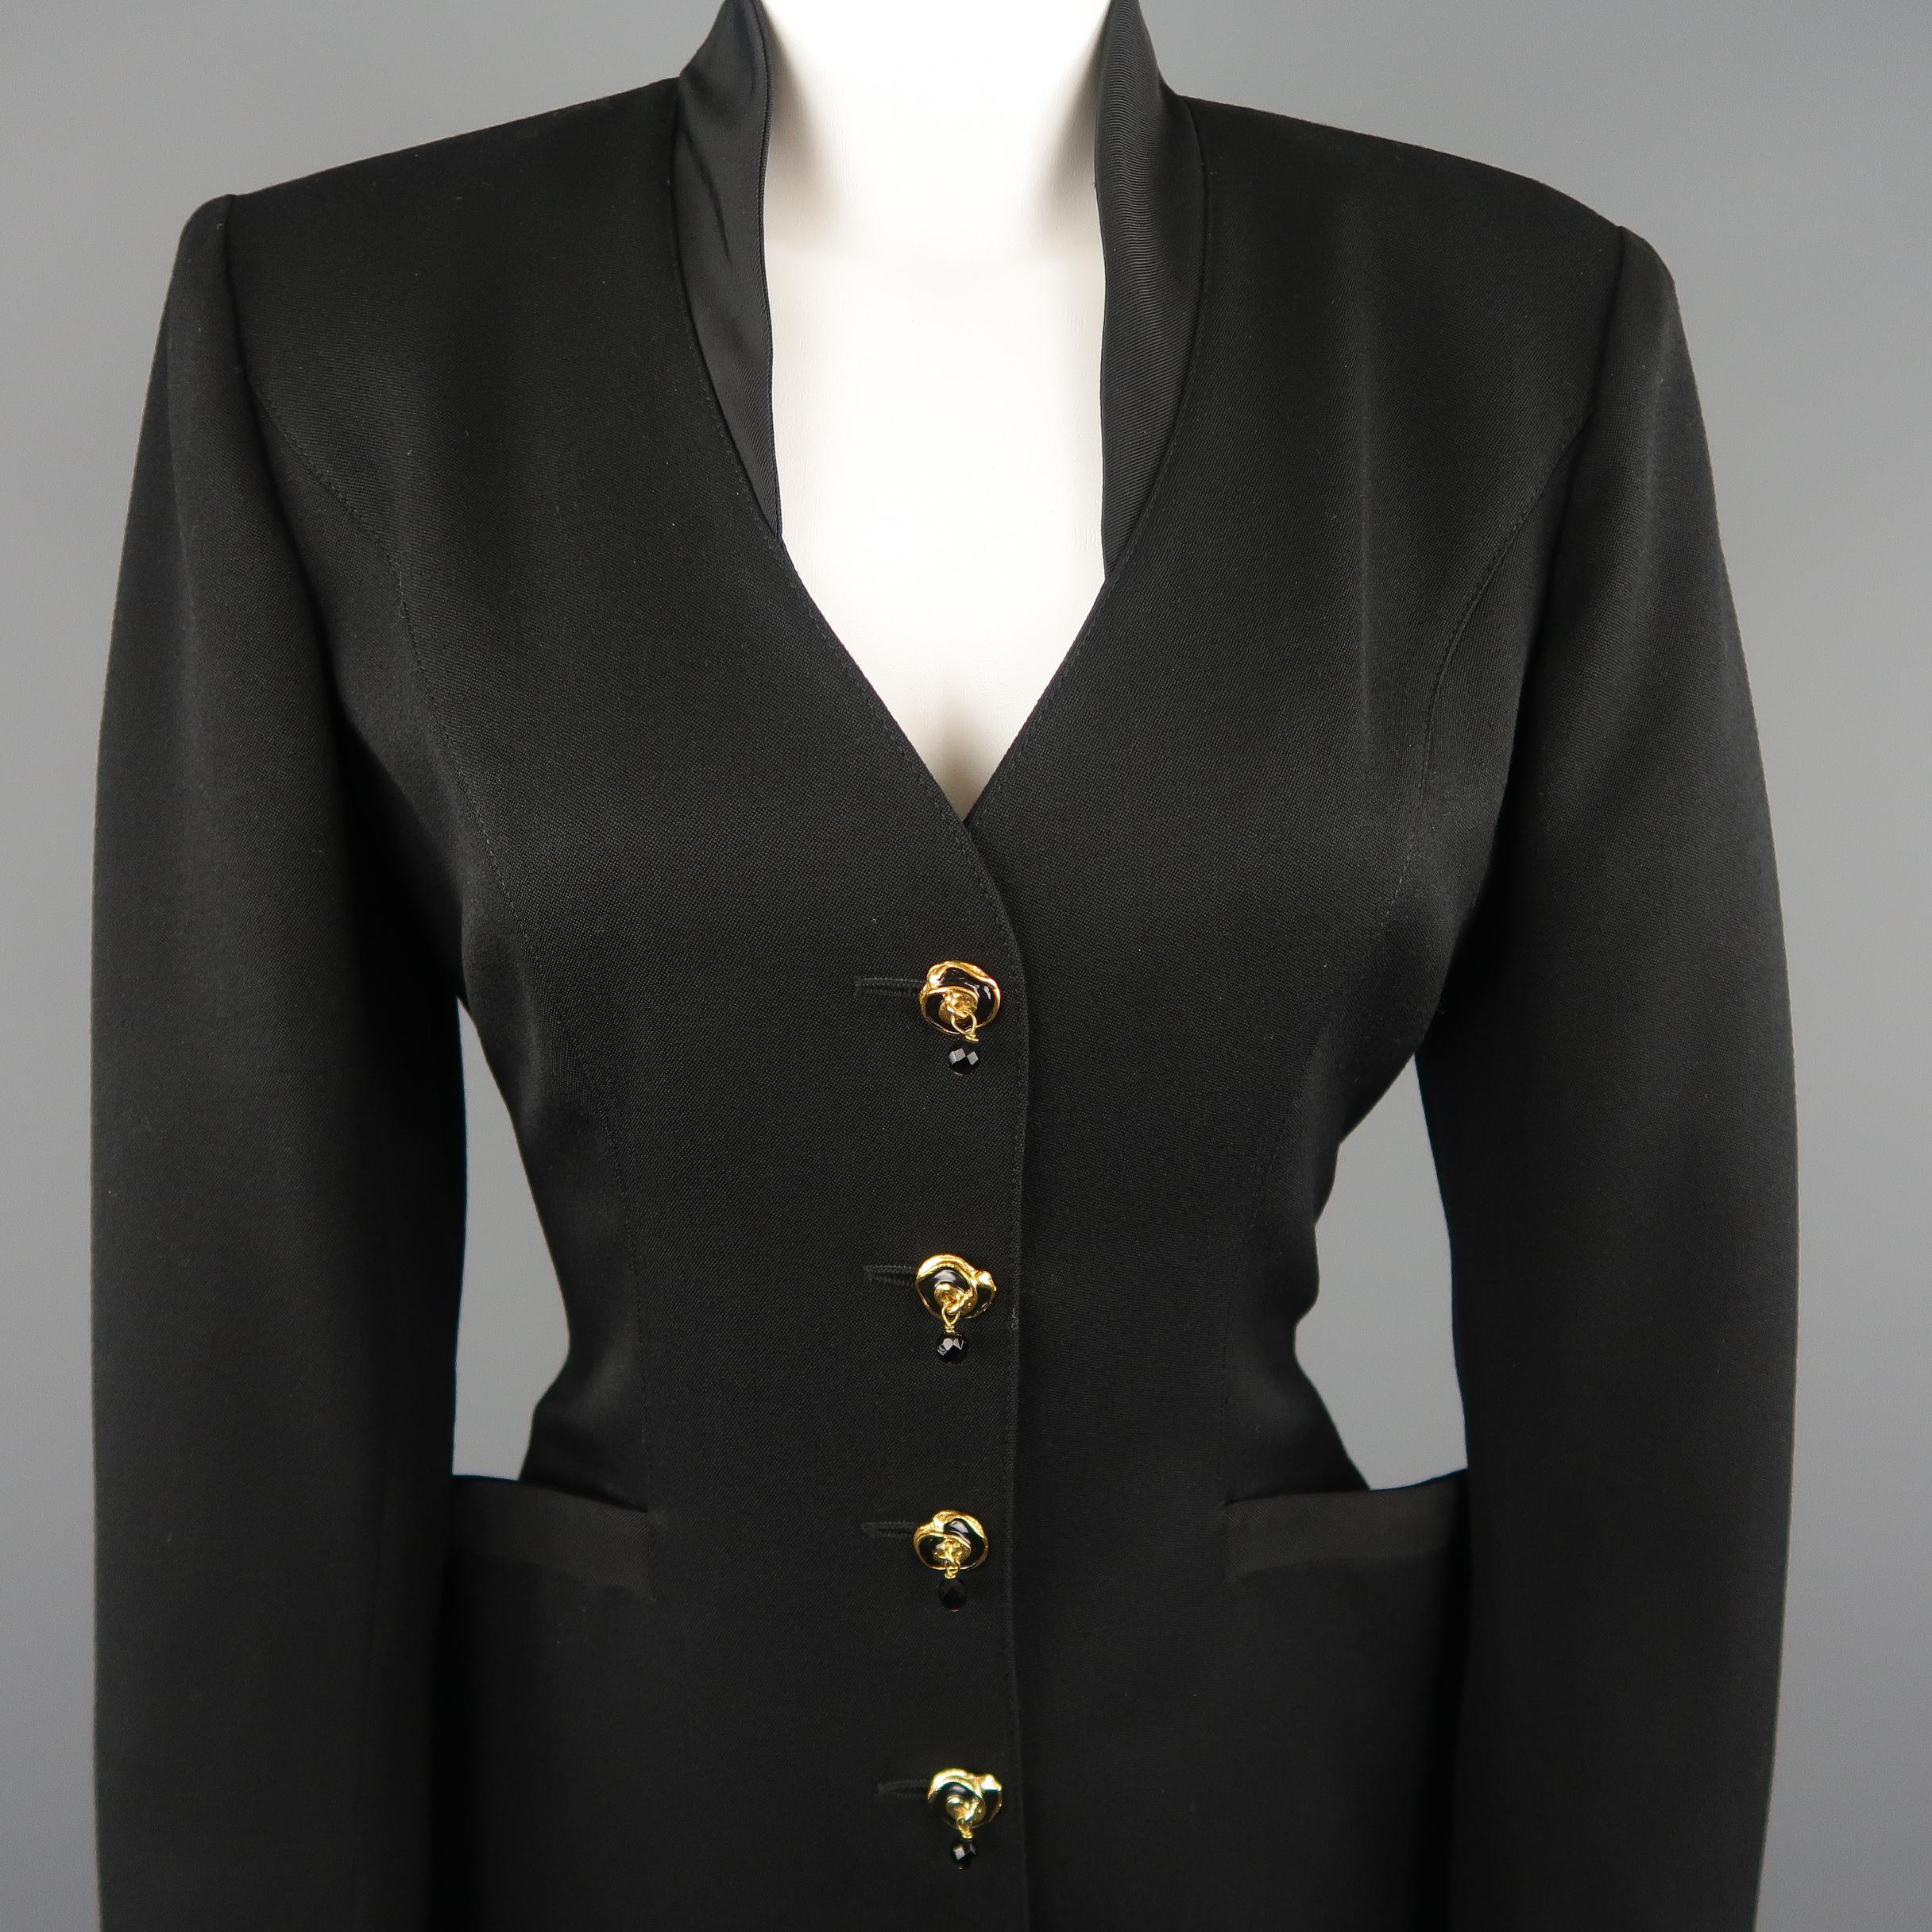 Vintage EMANUEL UNGARO dress comes in black twill with a high collar V neckline, side pockets, long sleeves with button cuffs, and button up front with yellow gold tone rose enamel buttons with bead accent.
 
Excellent Pre-Owned Condition.
Marked: